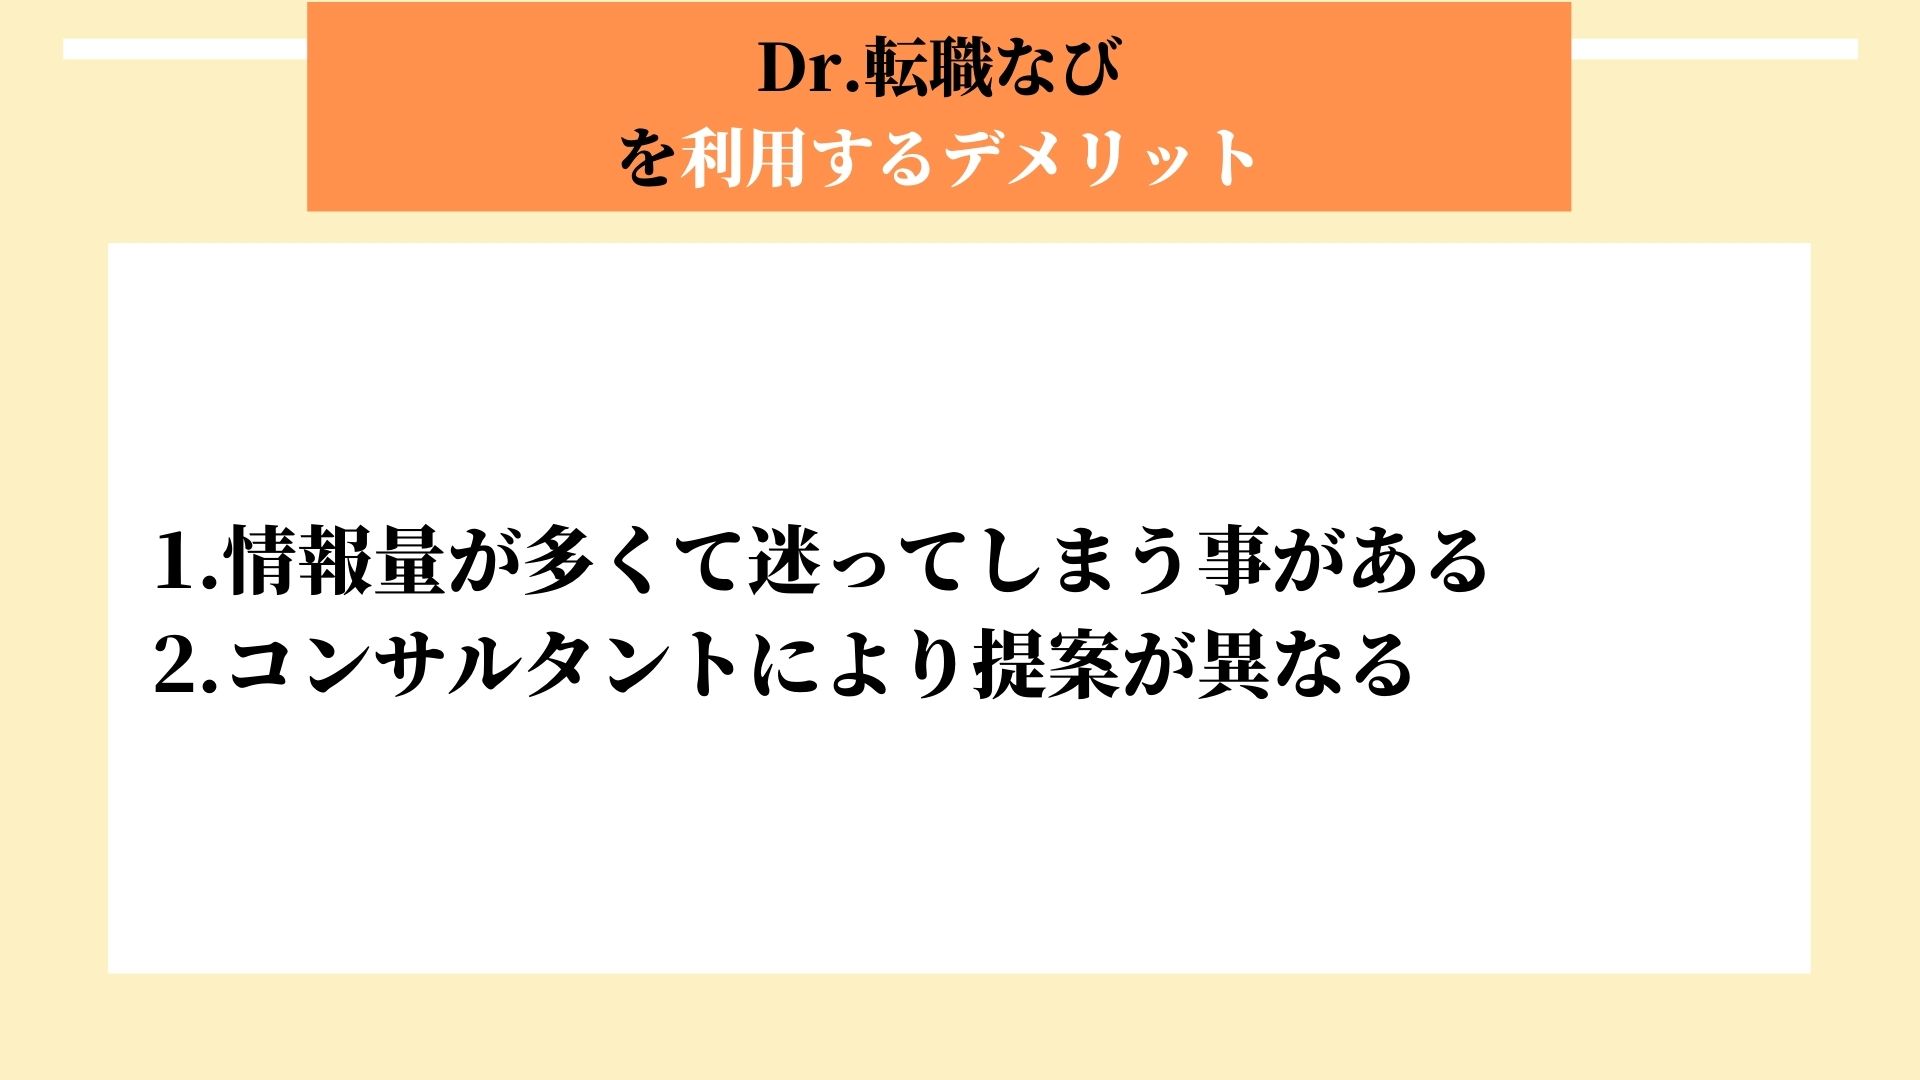 Dr.転職なび デメリット